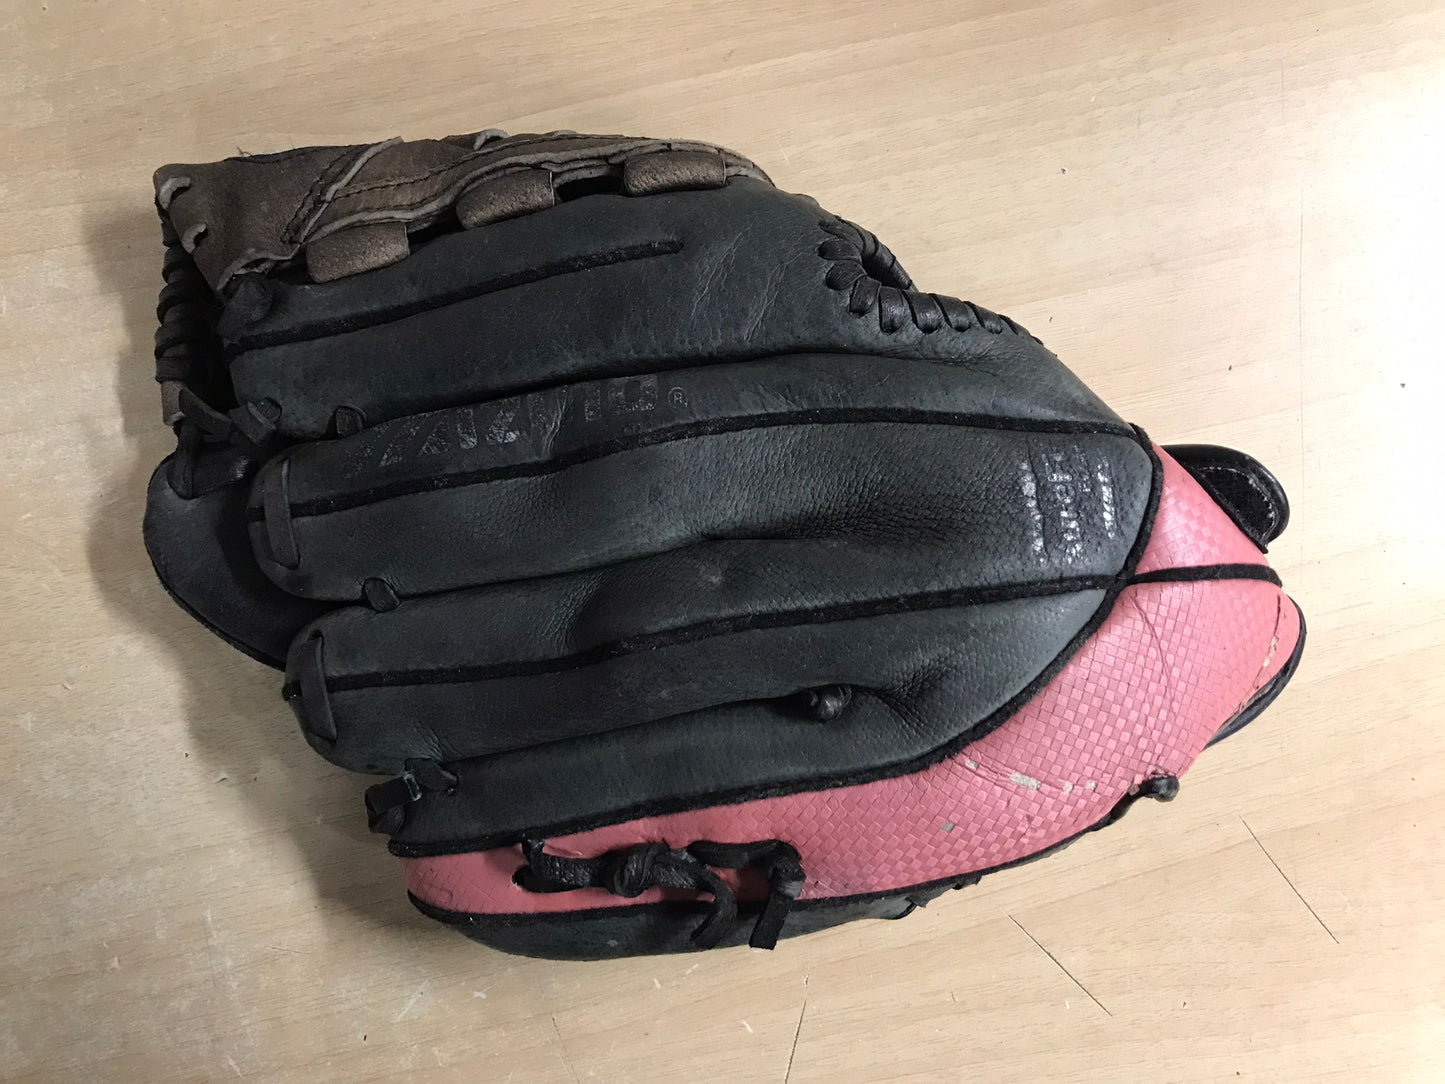 Baseball Glove Adult Size 11 inch Mizuno Black Pink Leather Fits on Left Hand